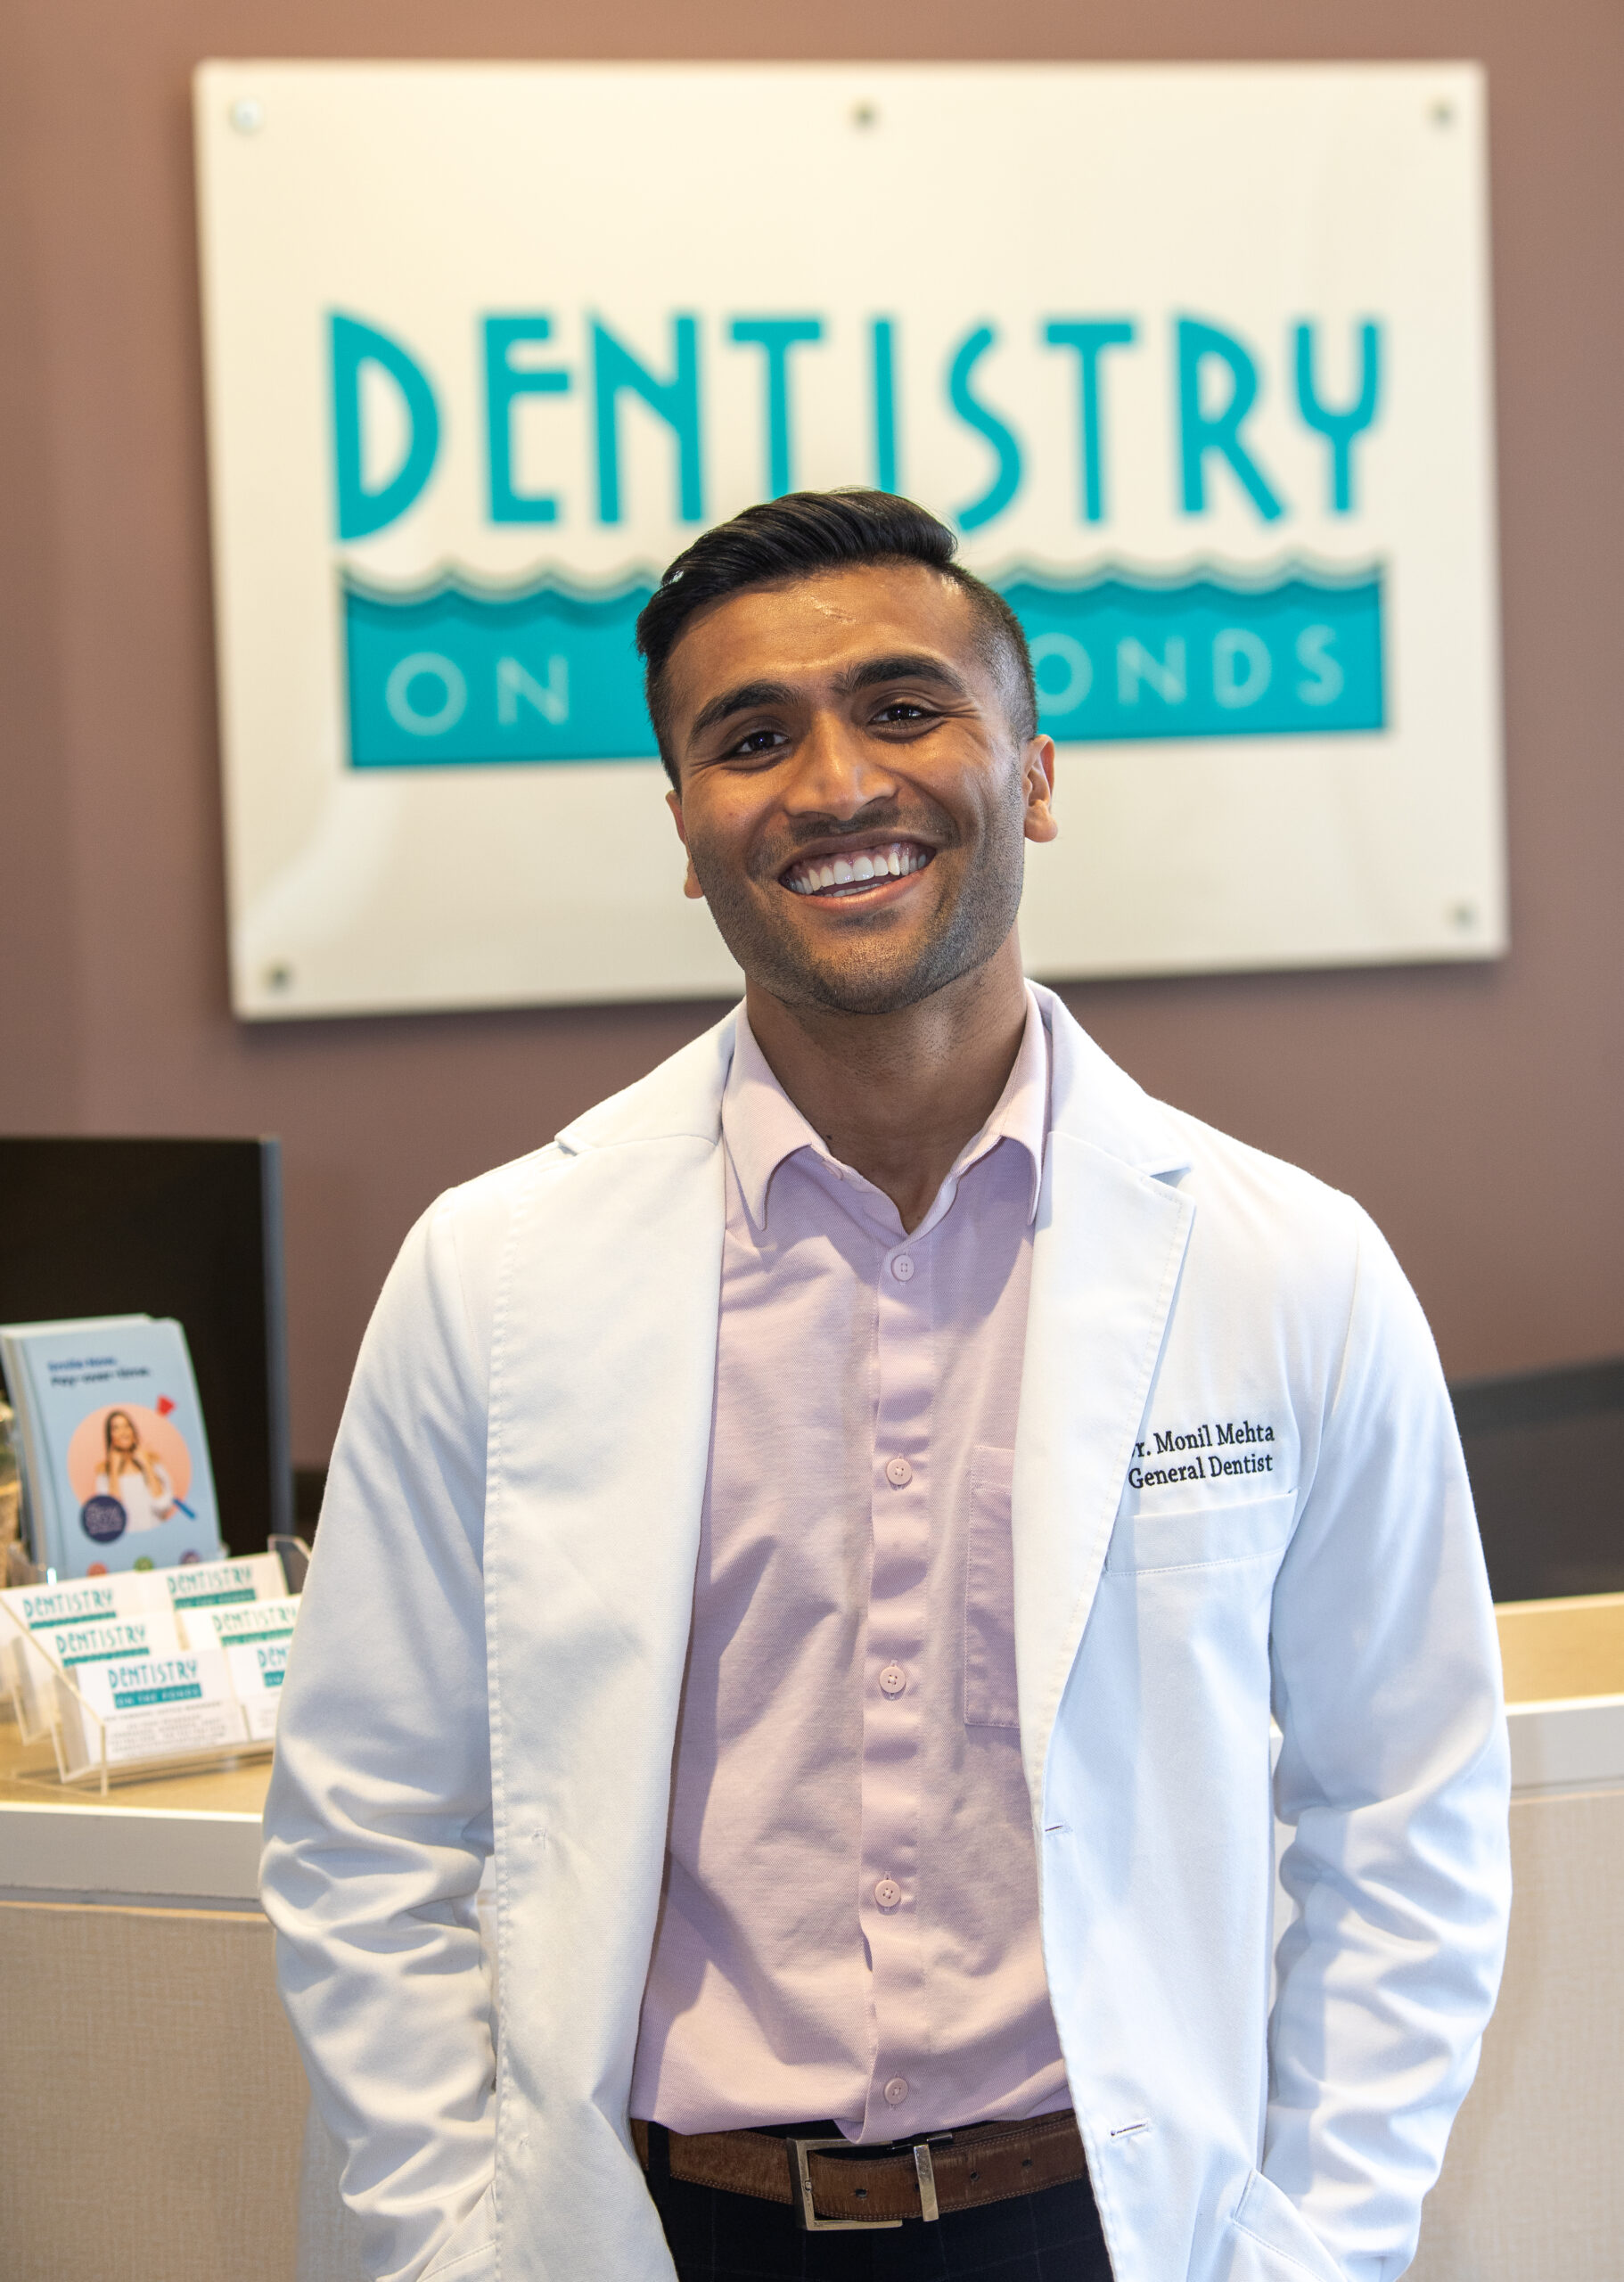 Dr. Monil Mehta. Dentistry on the Pods. General, Cosmetic, Restorative, Preventative, Family Dentist, Implants, Dentures, Clear Aligners (Clear Aligners), Botox, Sleep Apnea Therapy, Emergency Dental, Teeth Whitening, Oral Surgery. Dentist in Chanhassen, MN 55317